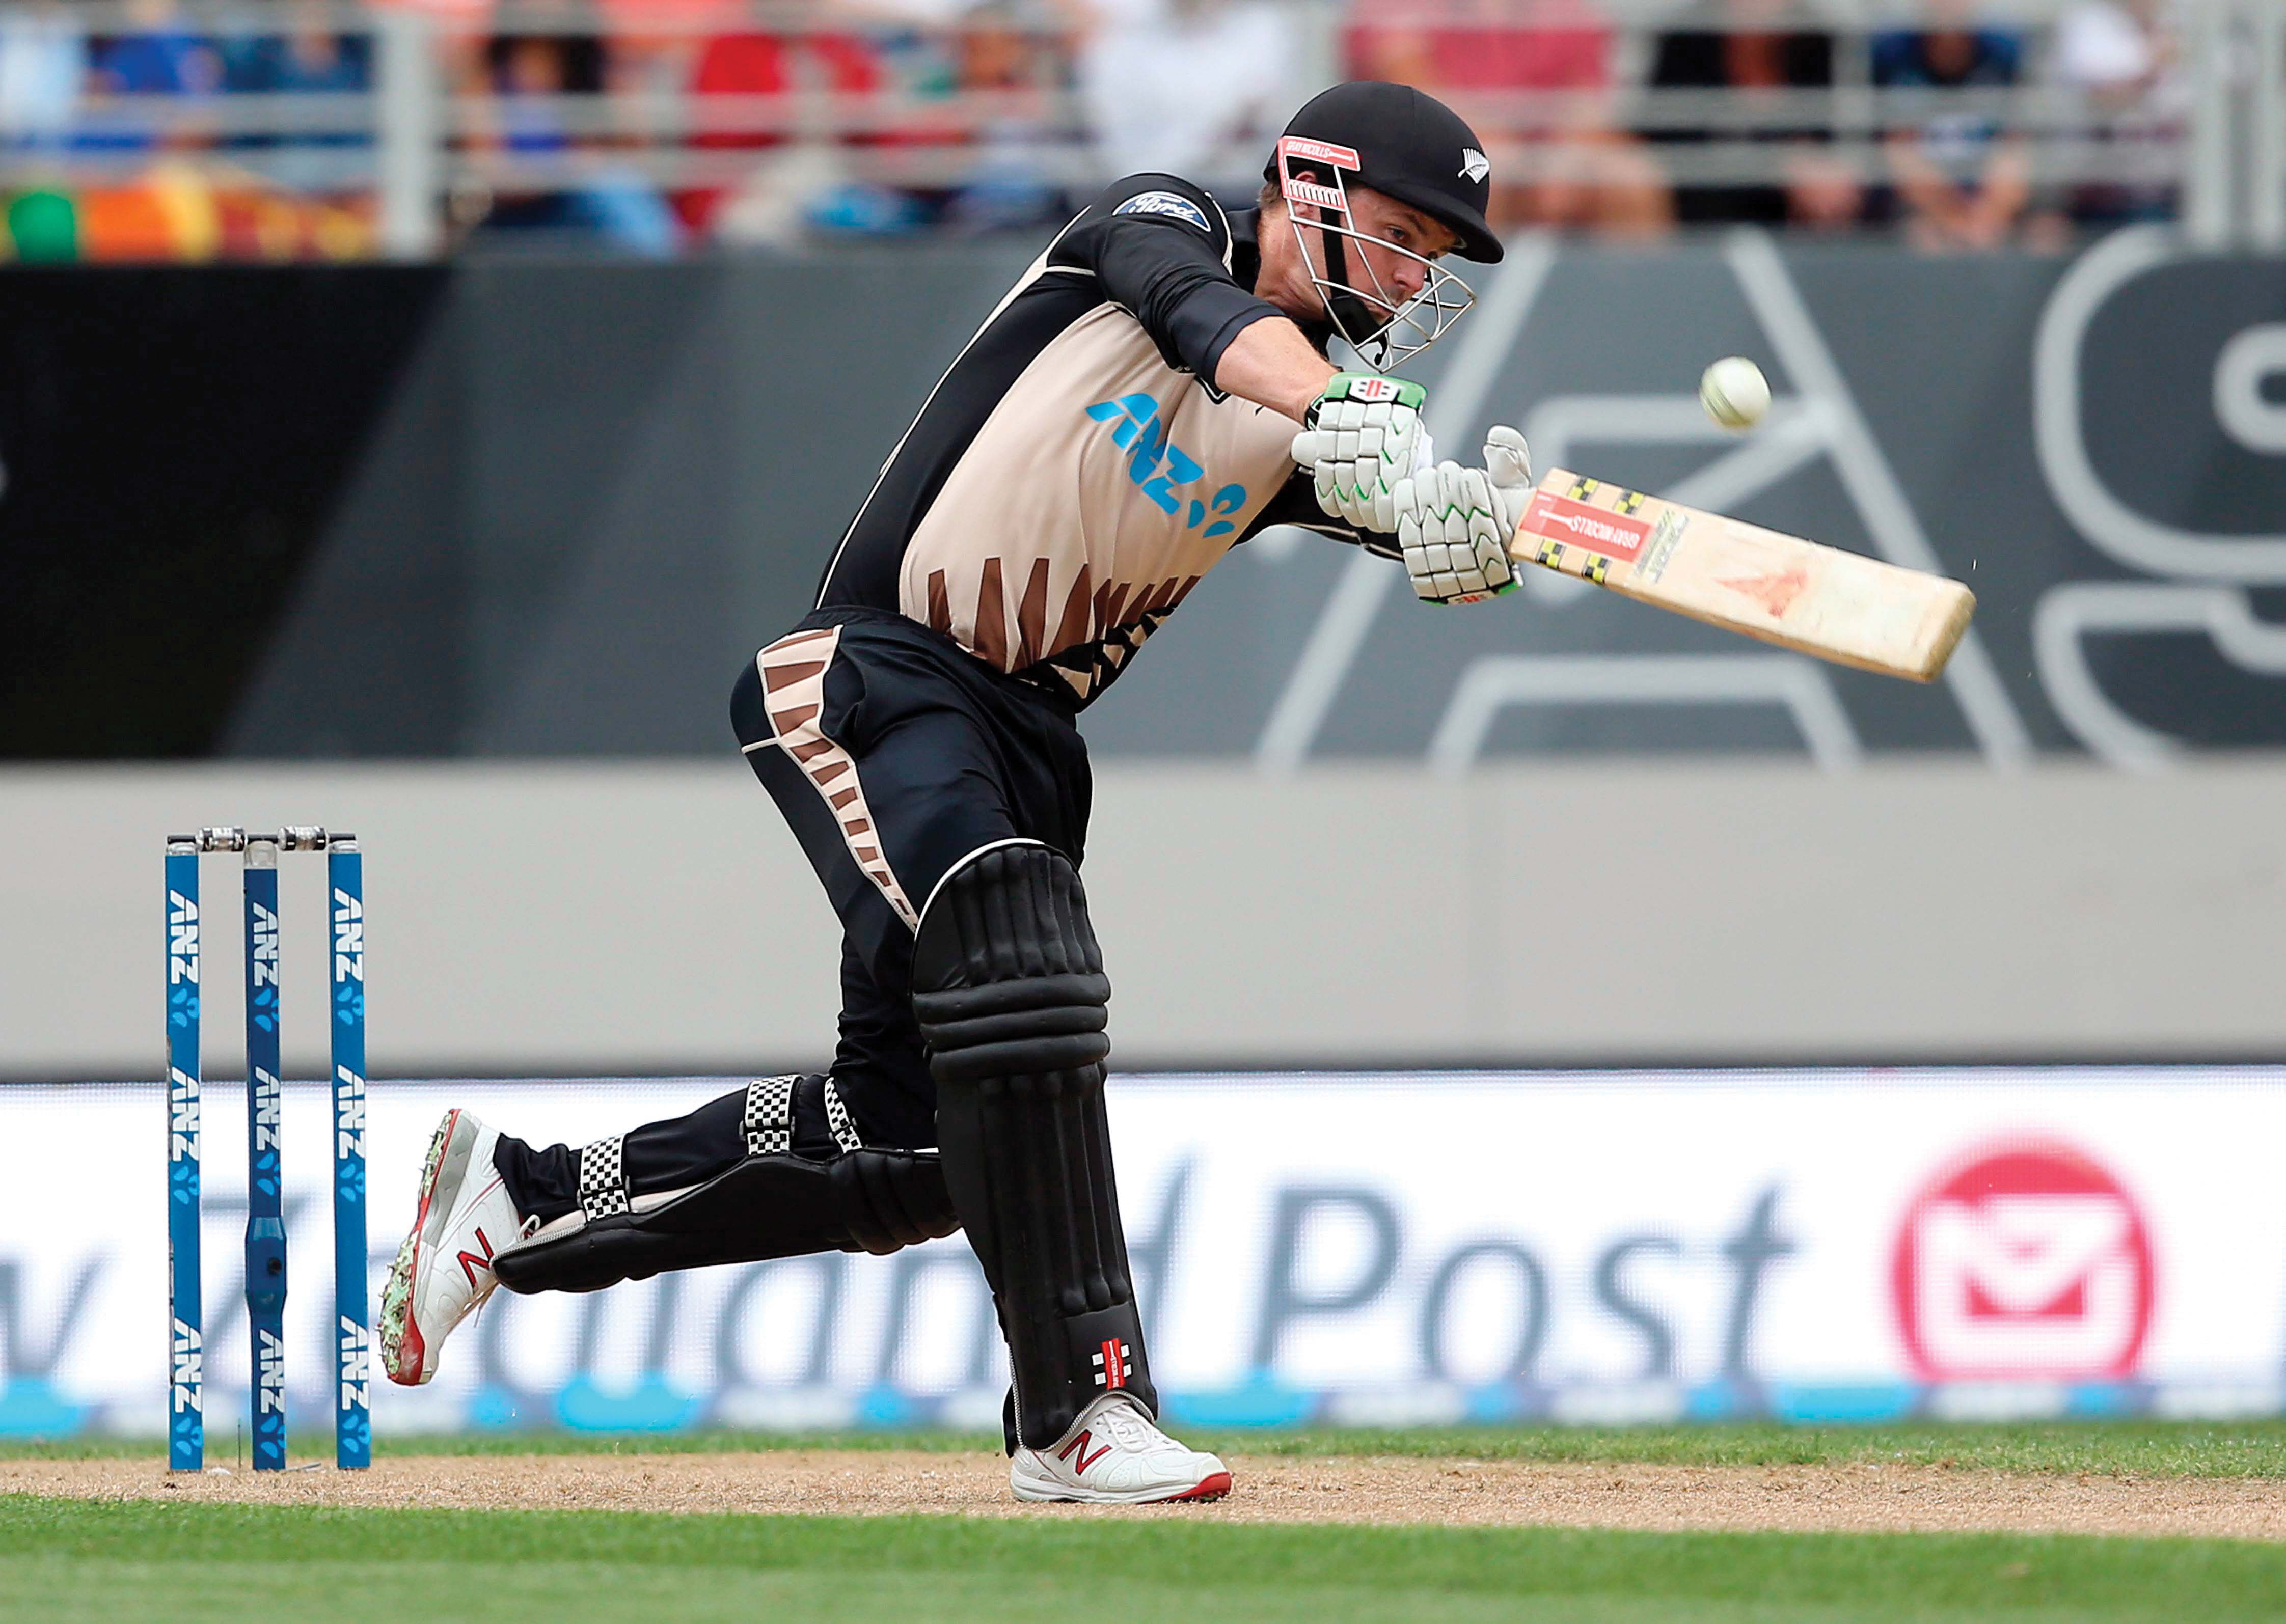 munro blasted new zealand s fastest t20i half century off 14 balls to surpass a mark set by guptill earlier in the innings off 19 balls photo afp